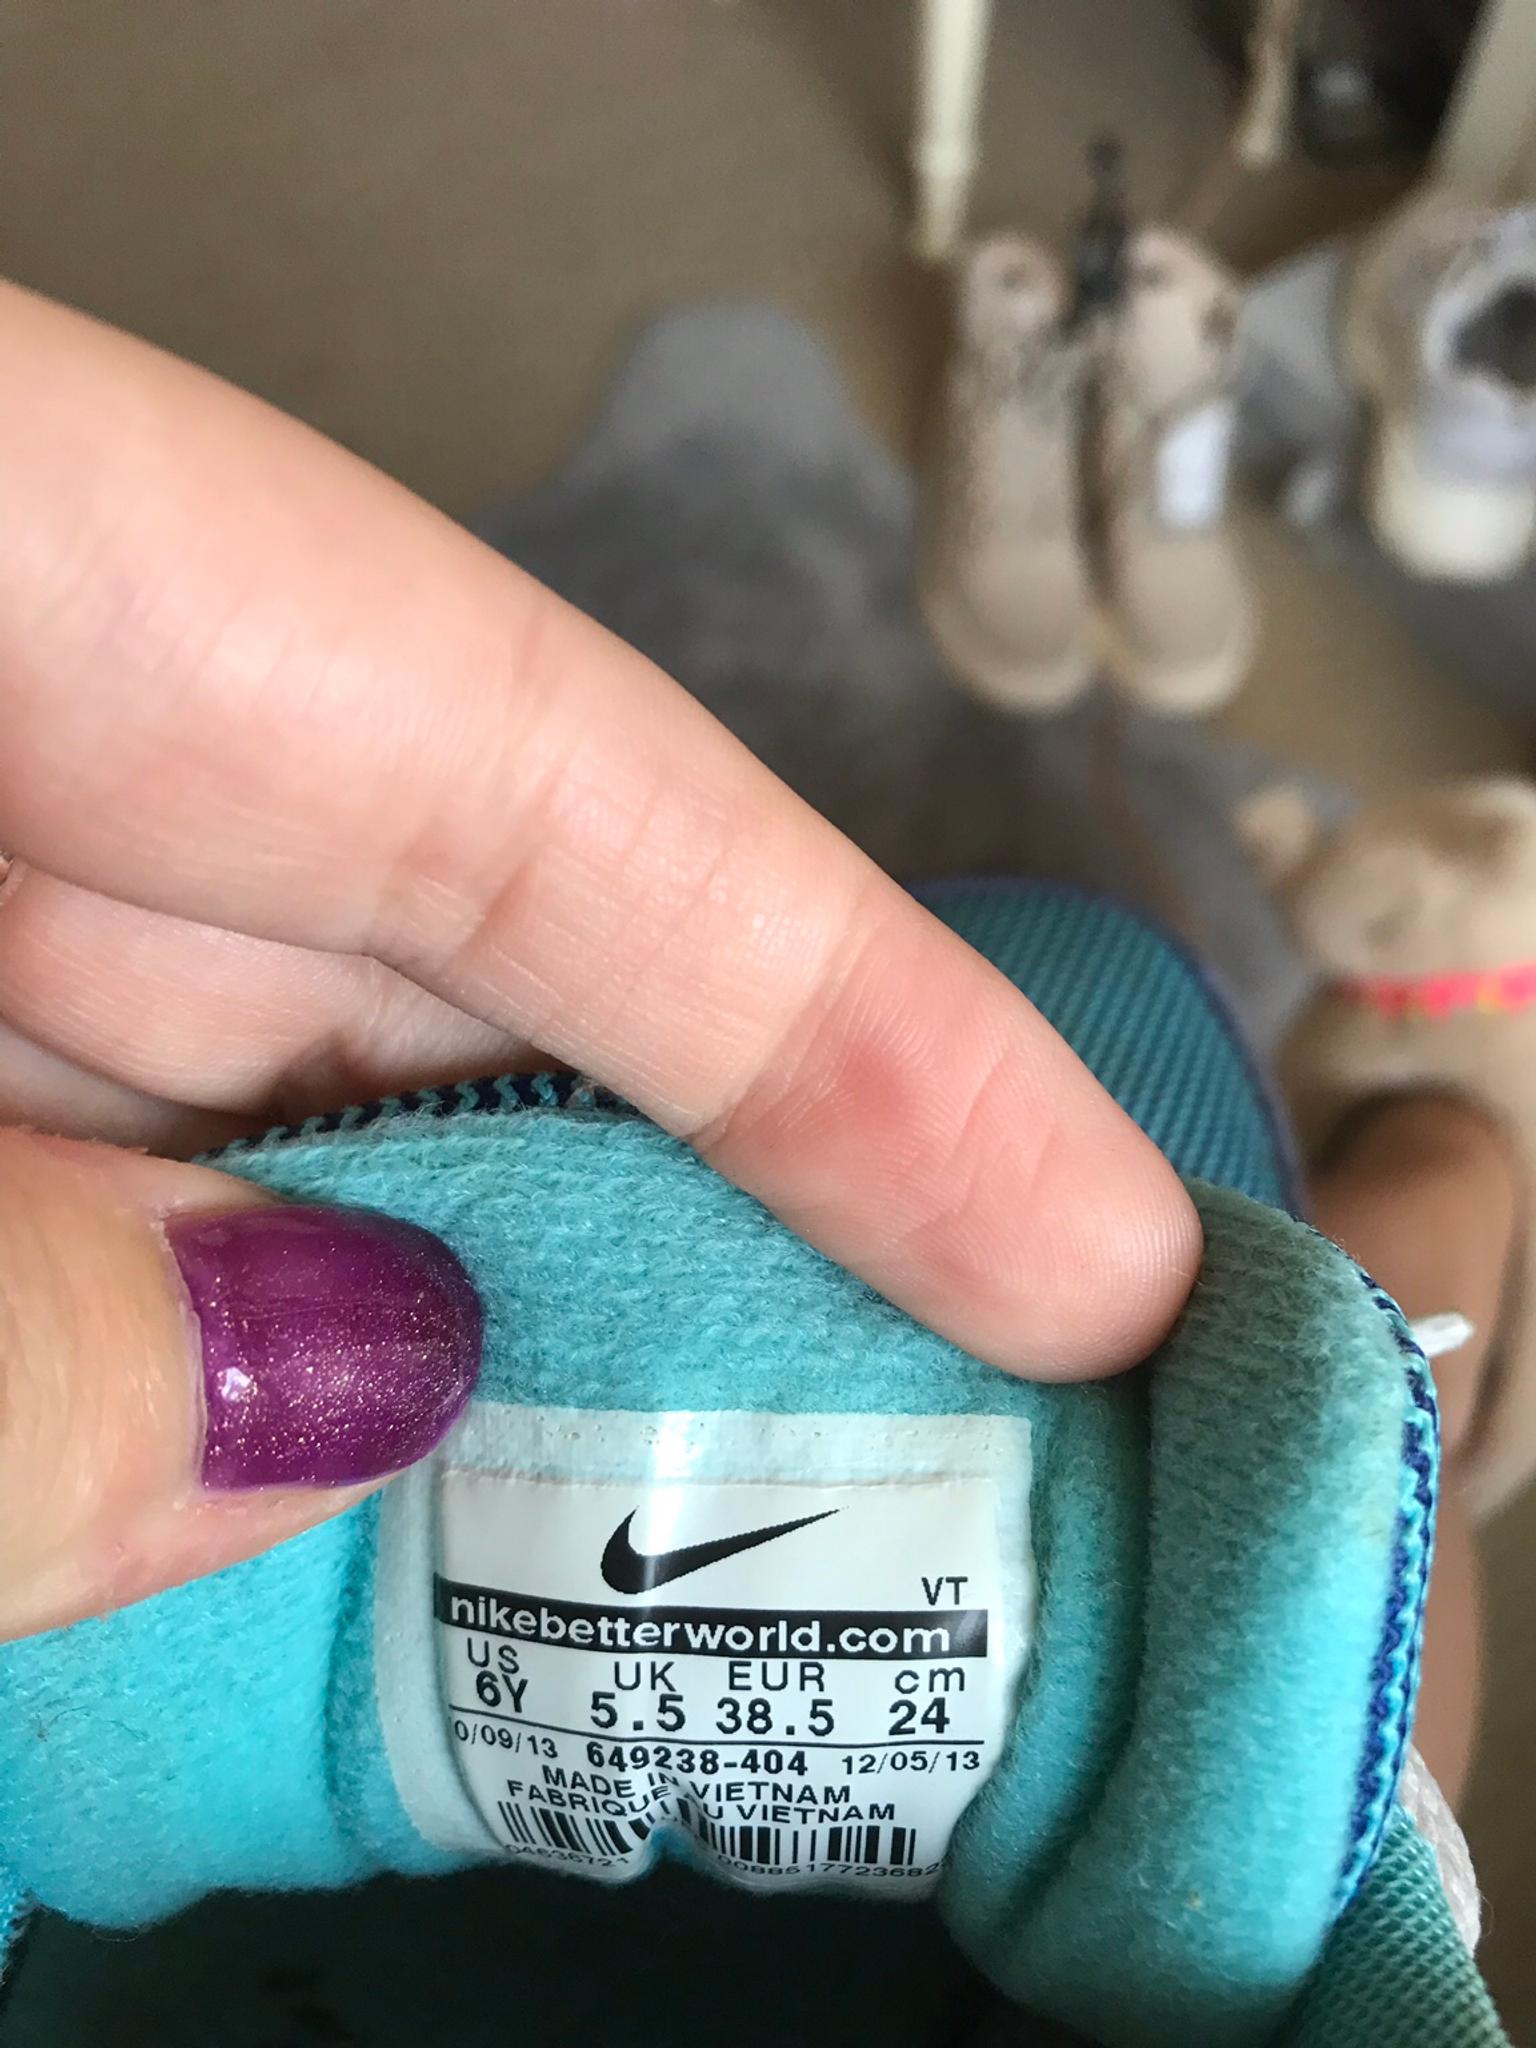 are nike junior sizes the same as women's